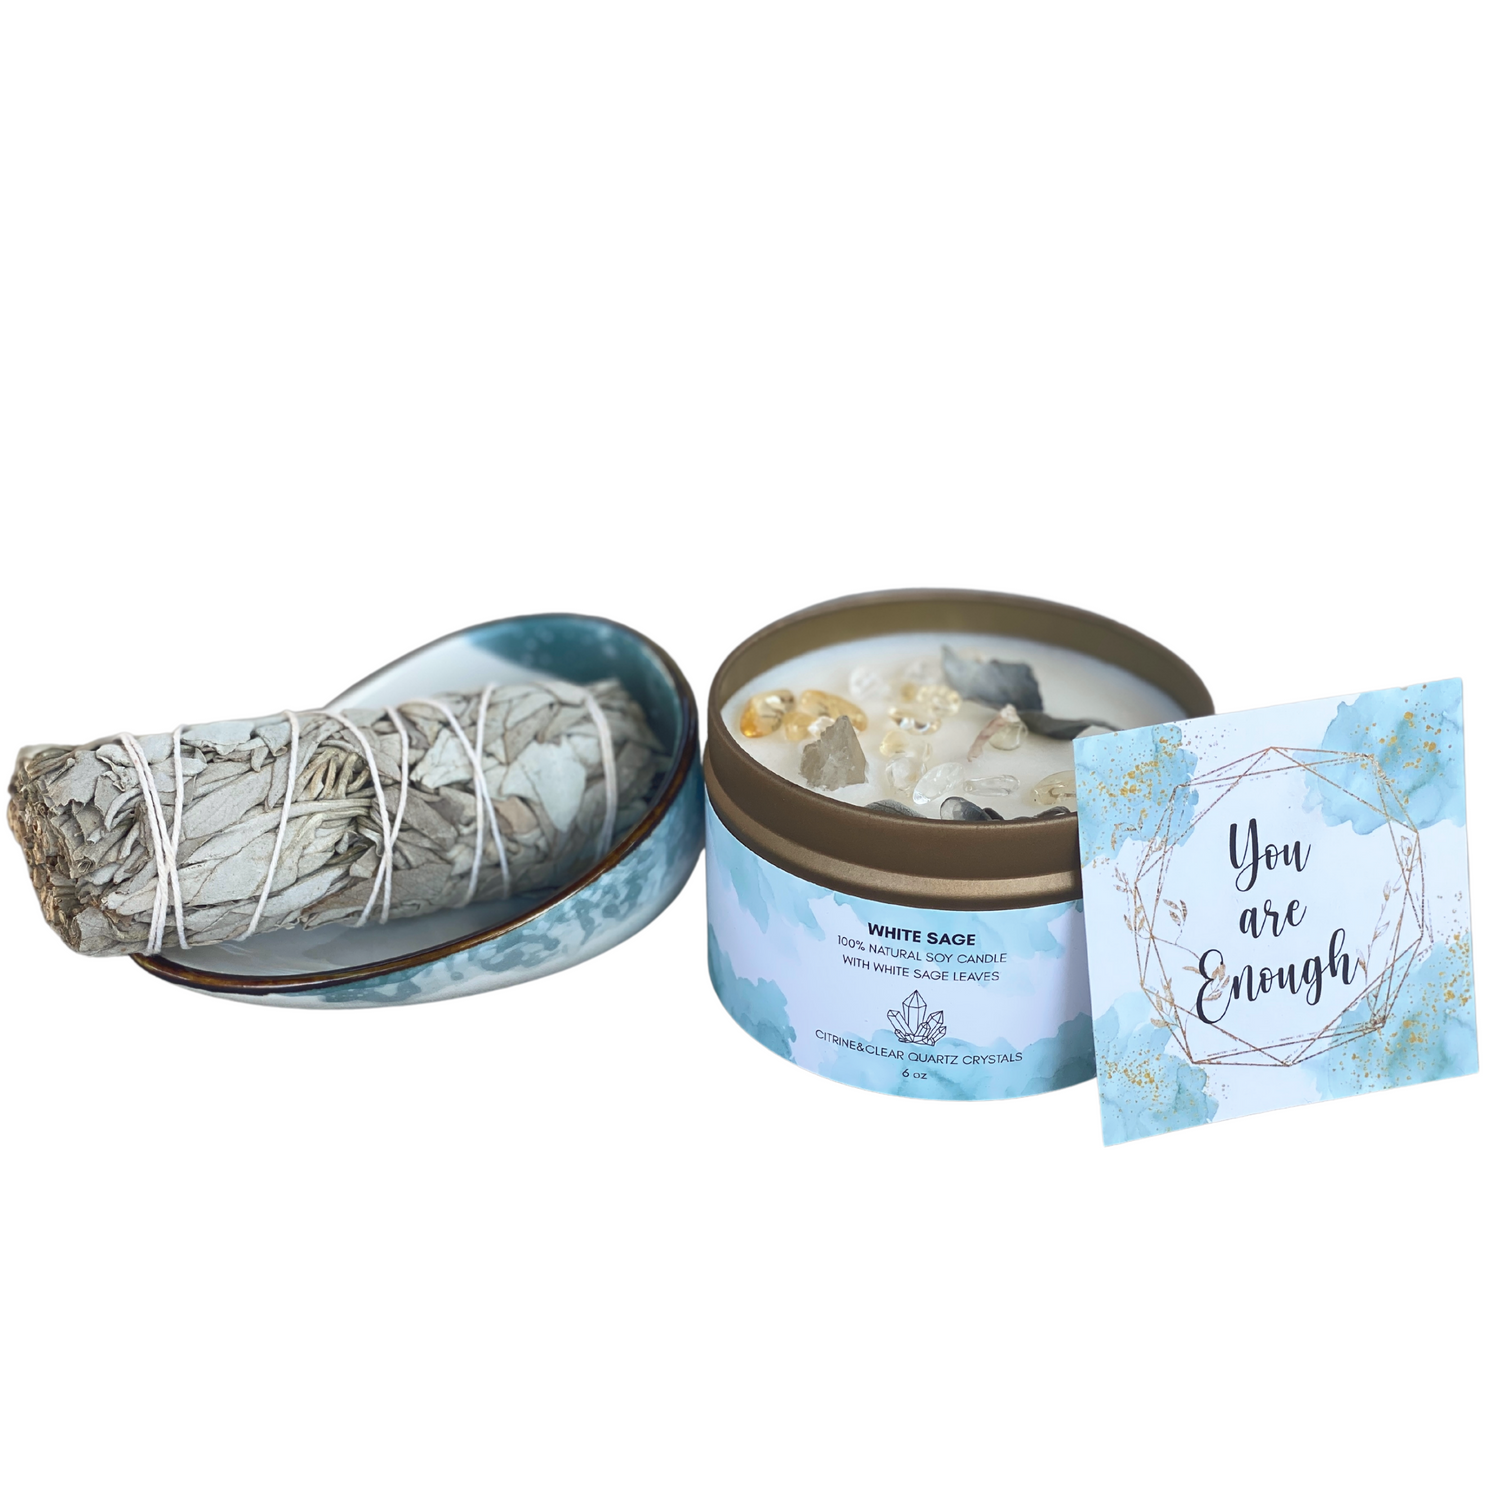 Crystal Candle and White Sage Kits